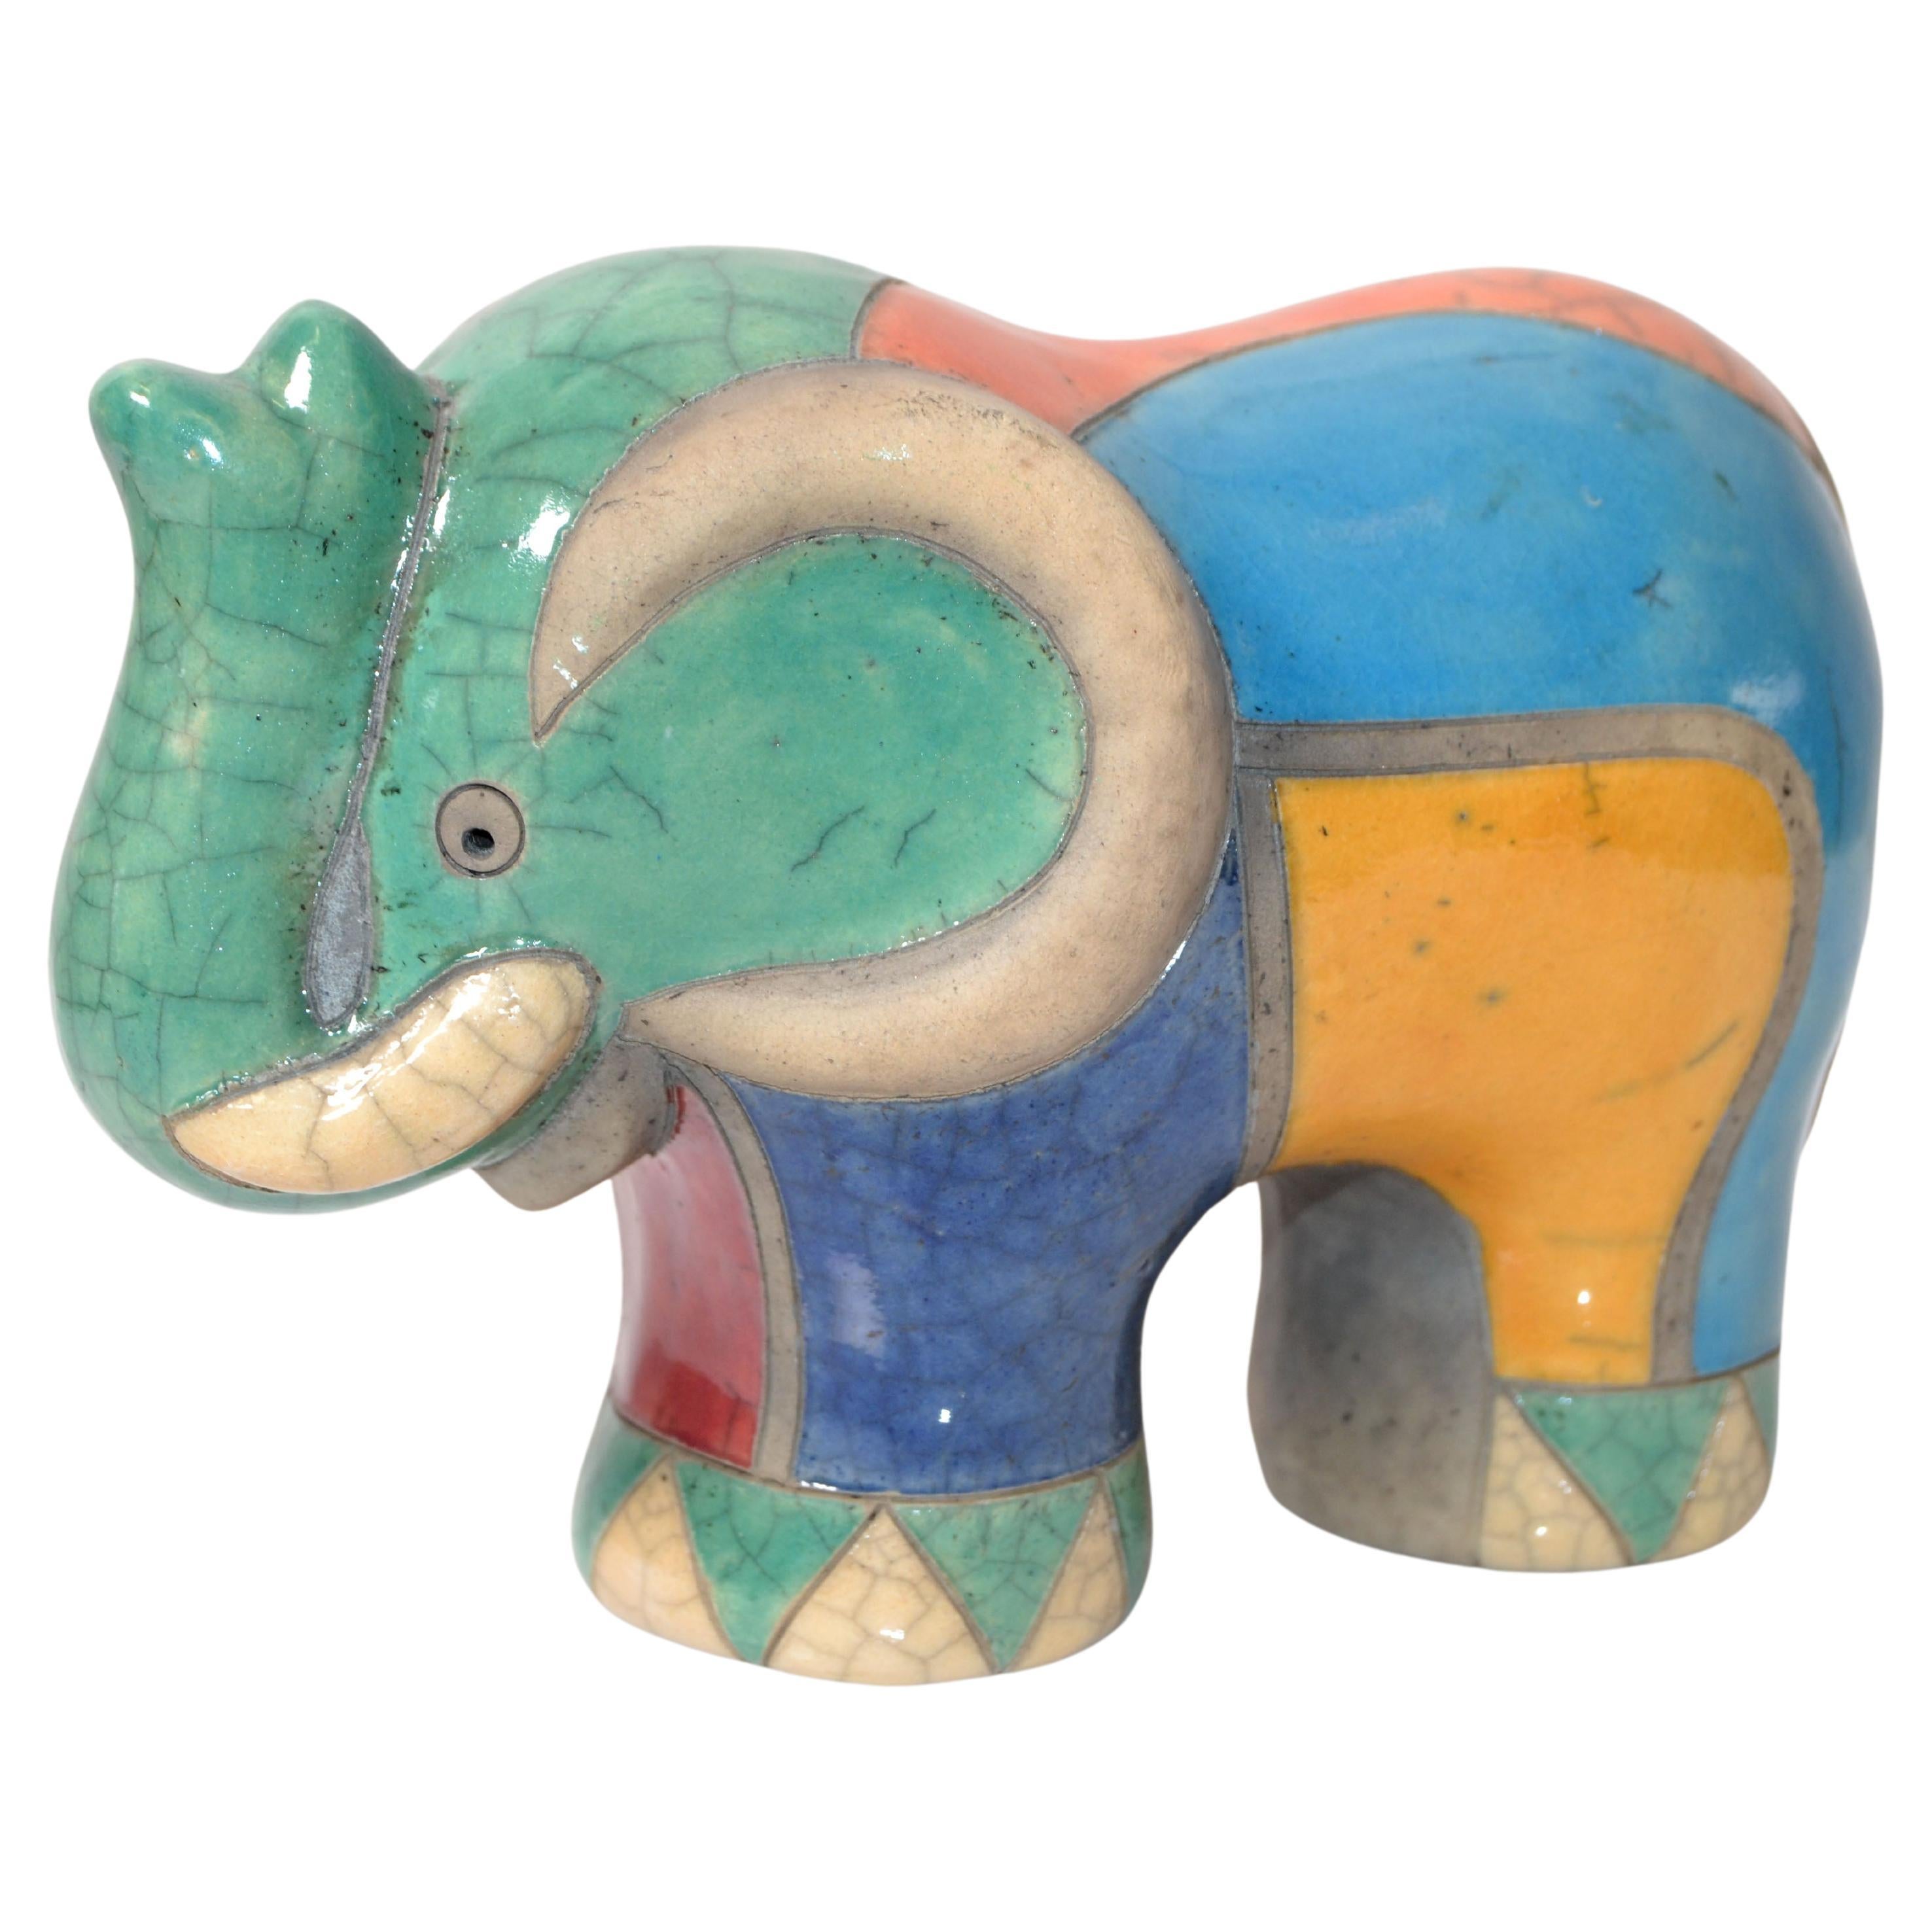 Luca CL Marked Colorful Ceramic Elephant Sculpture Mid-Century Modern Italy 1970